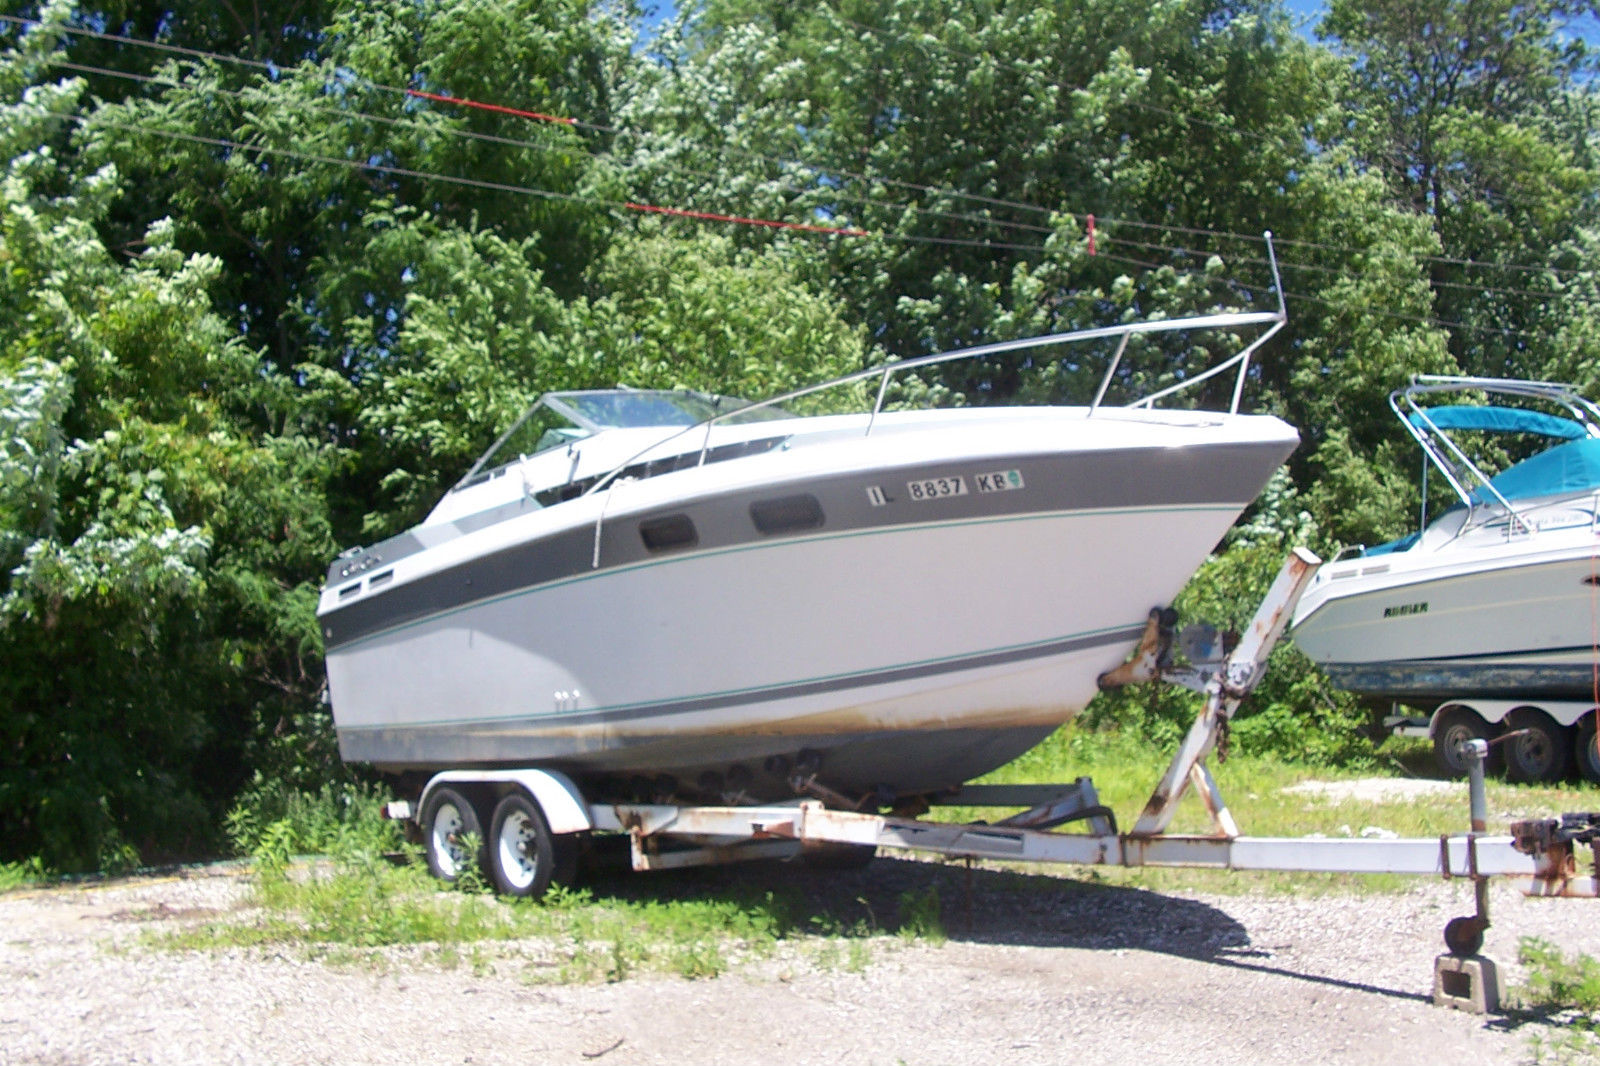 Chris Craft Ameorsport 1988 for sale for $4,000 - Boats ...